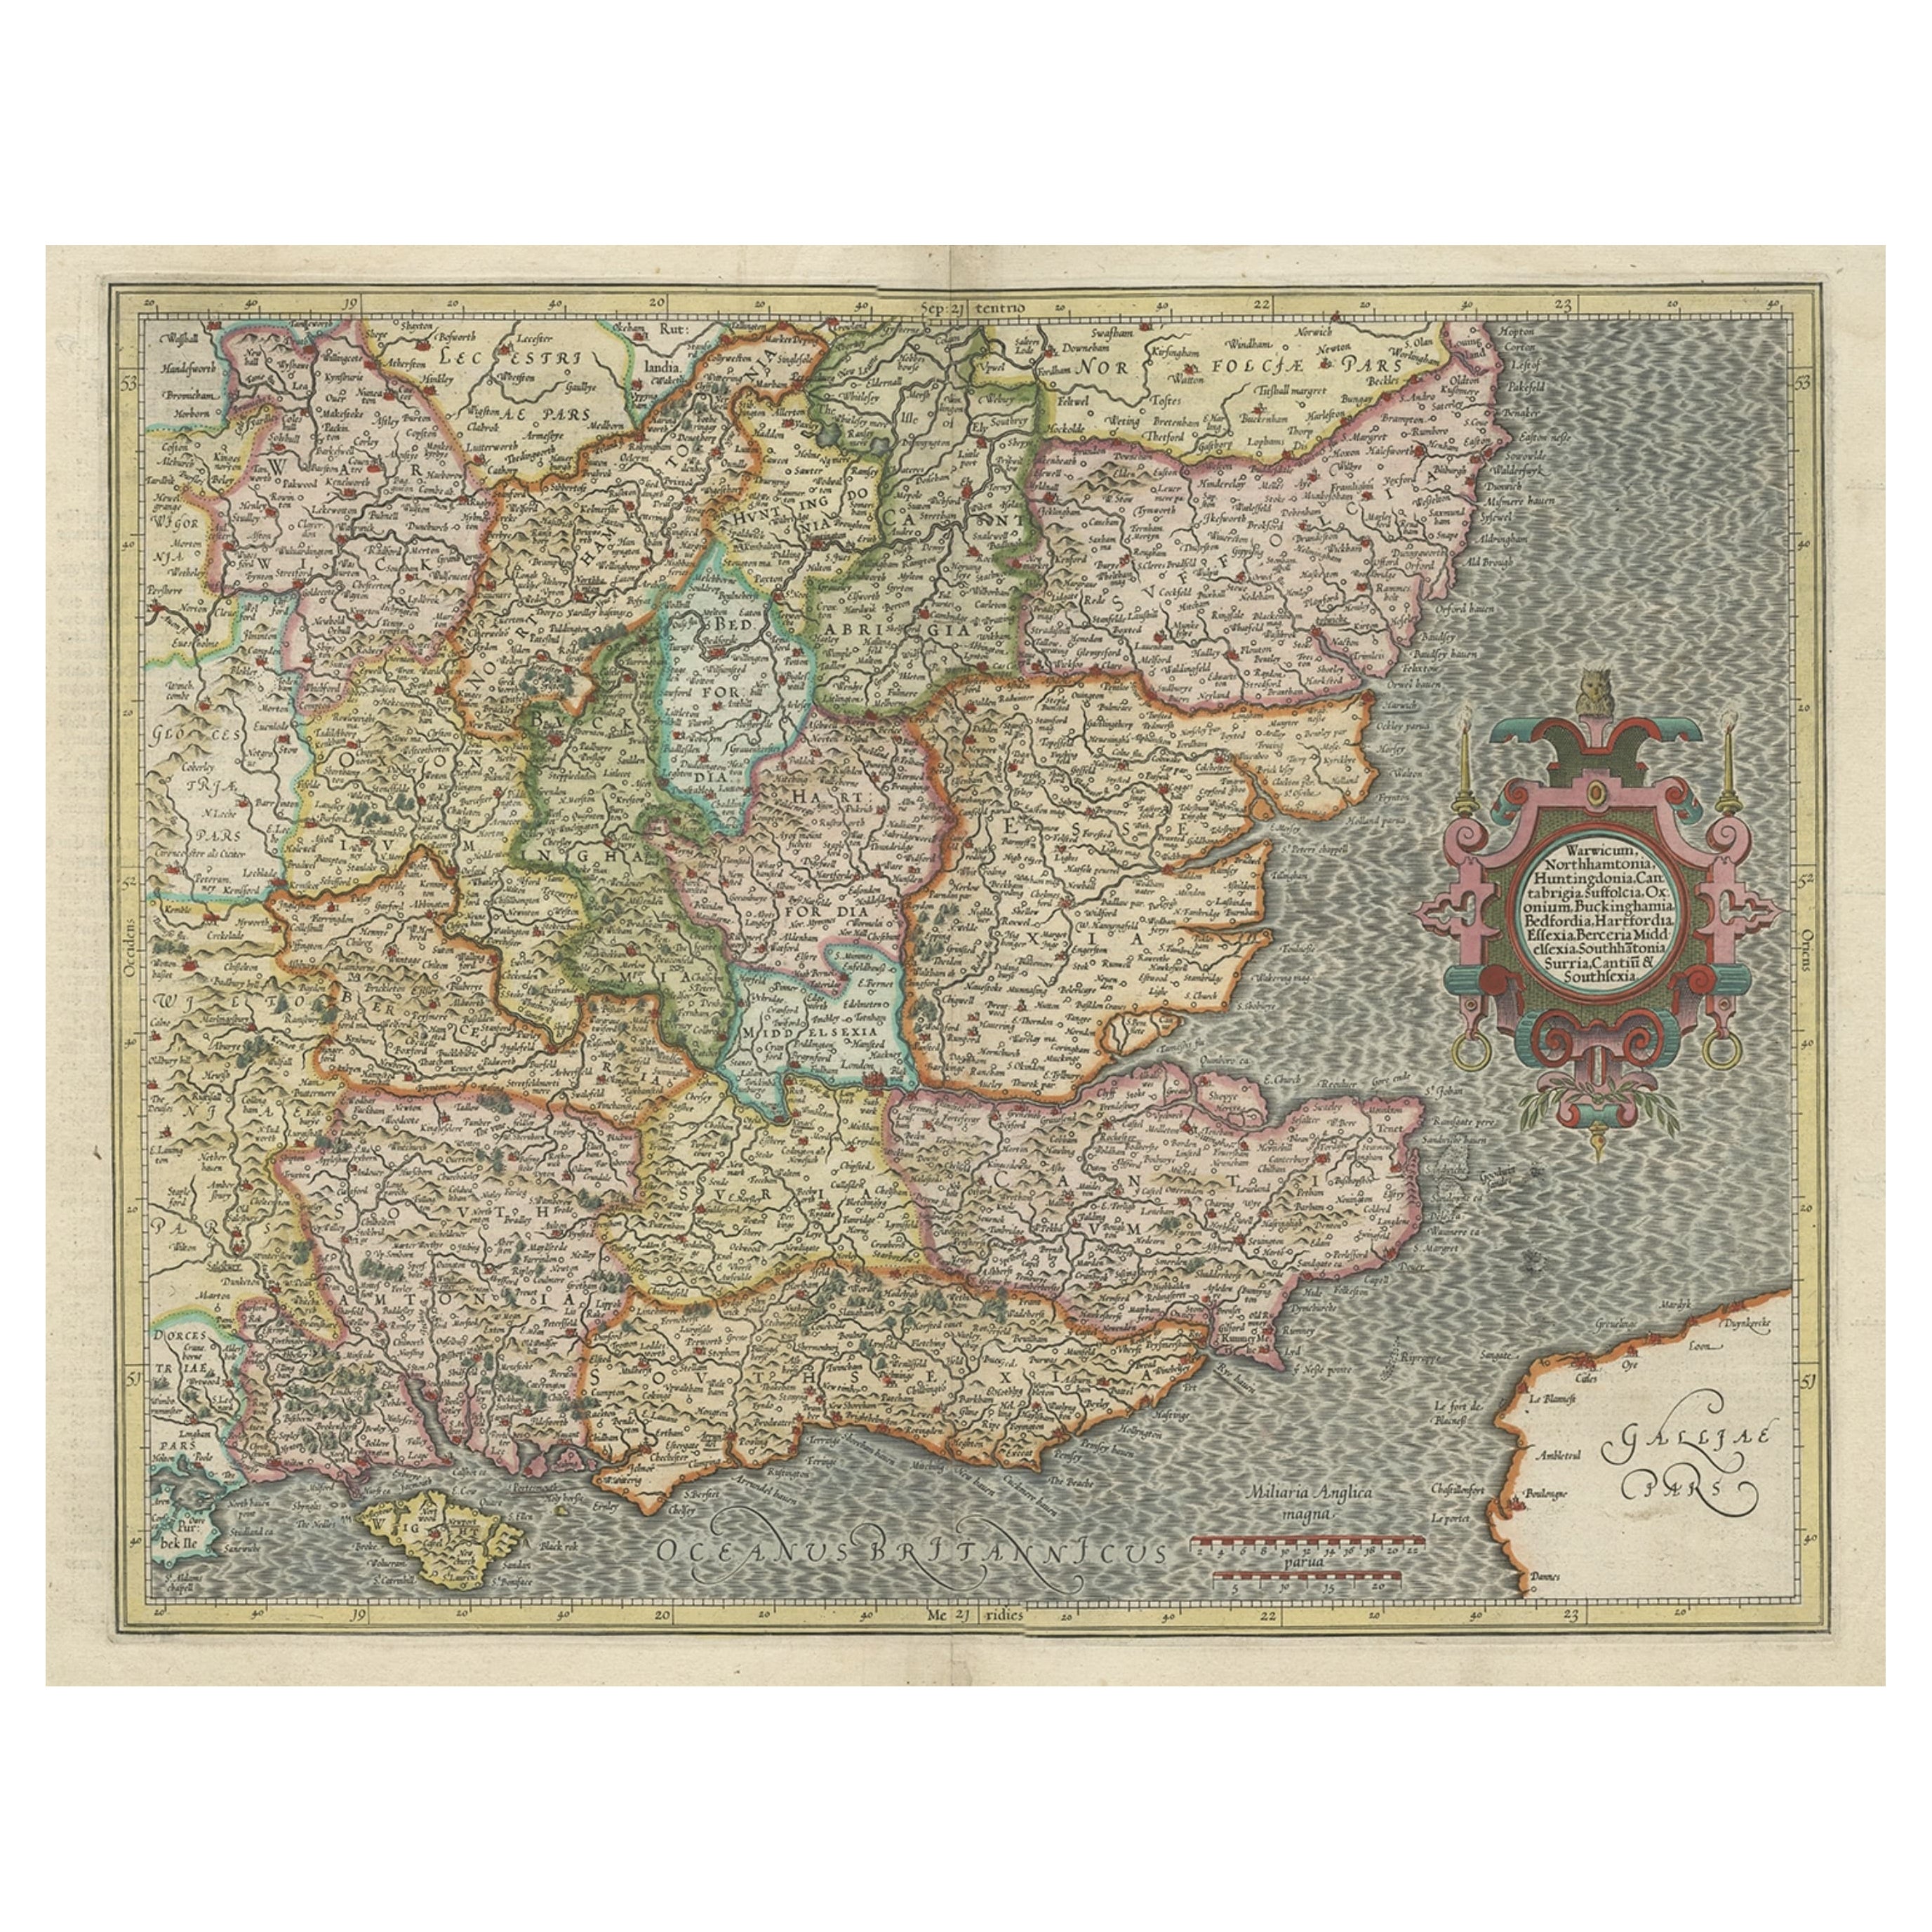 Original Old Map of South East England Incl London, Oxford, Cambridge, Etc, 1633 For Sale